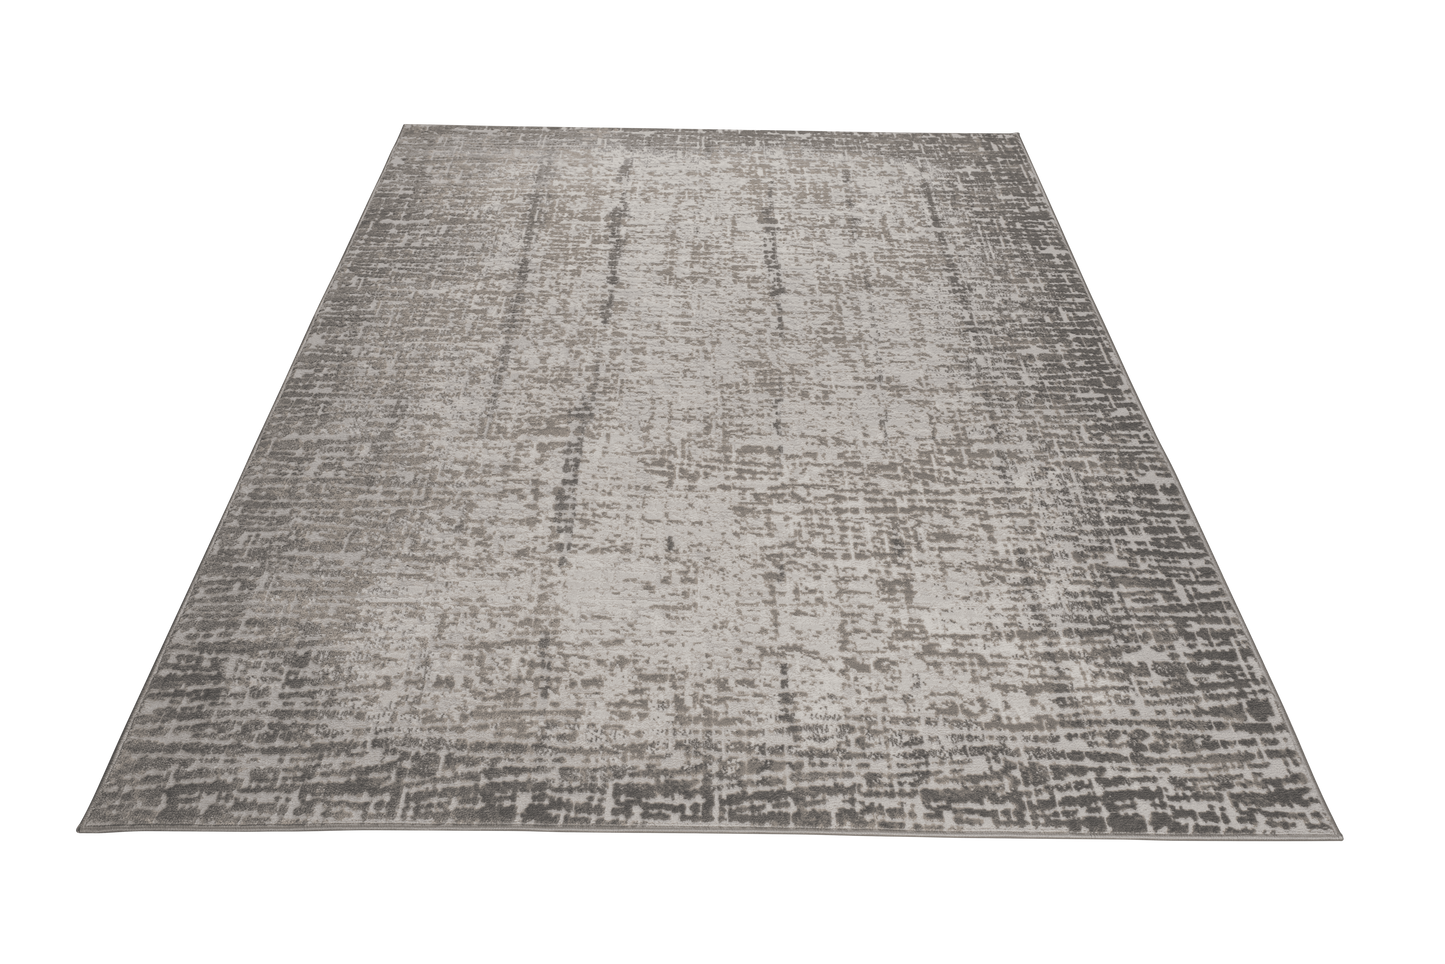 beige grey abstract rustic minimalist modern area rug for living room bedroom 4x6, 4x5 ft Small Carpet, Home Office, Living Room, Bedroom